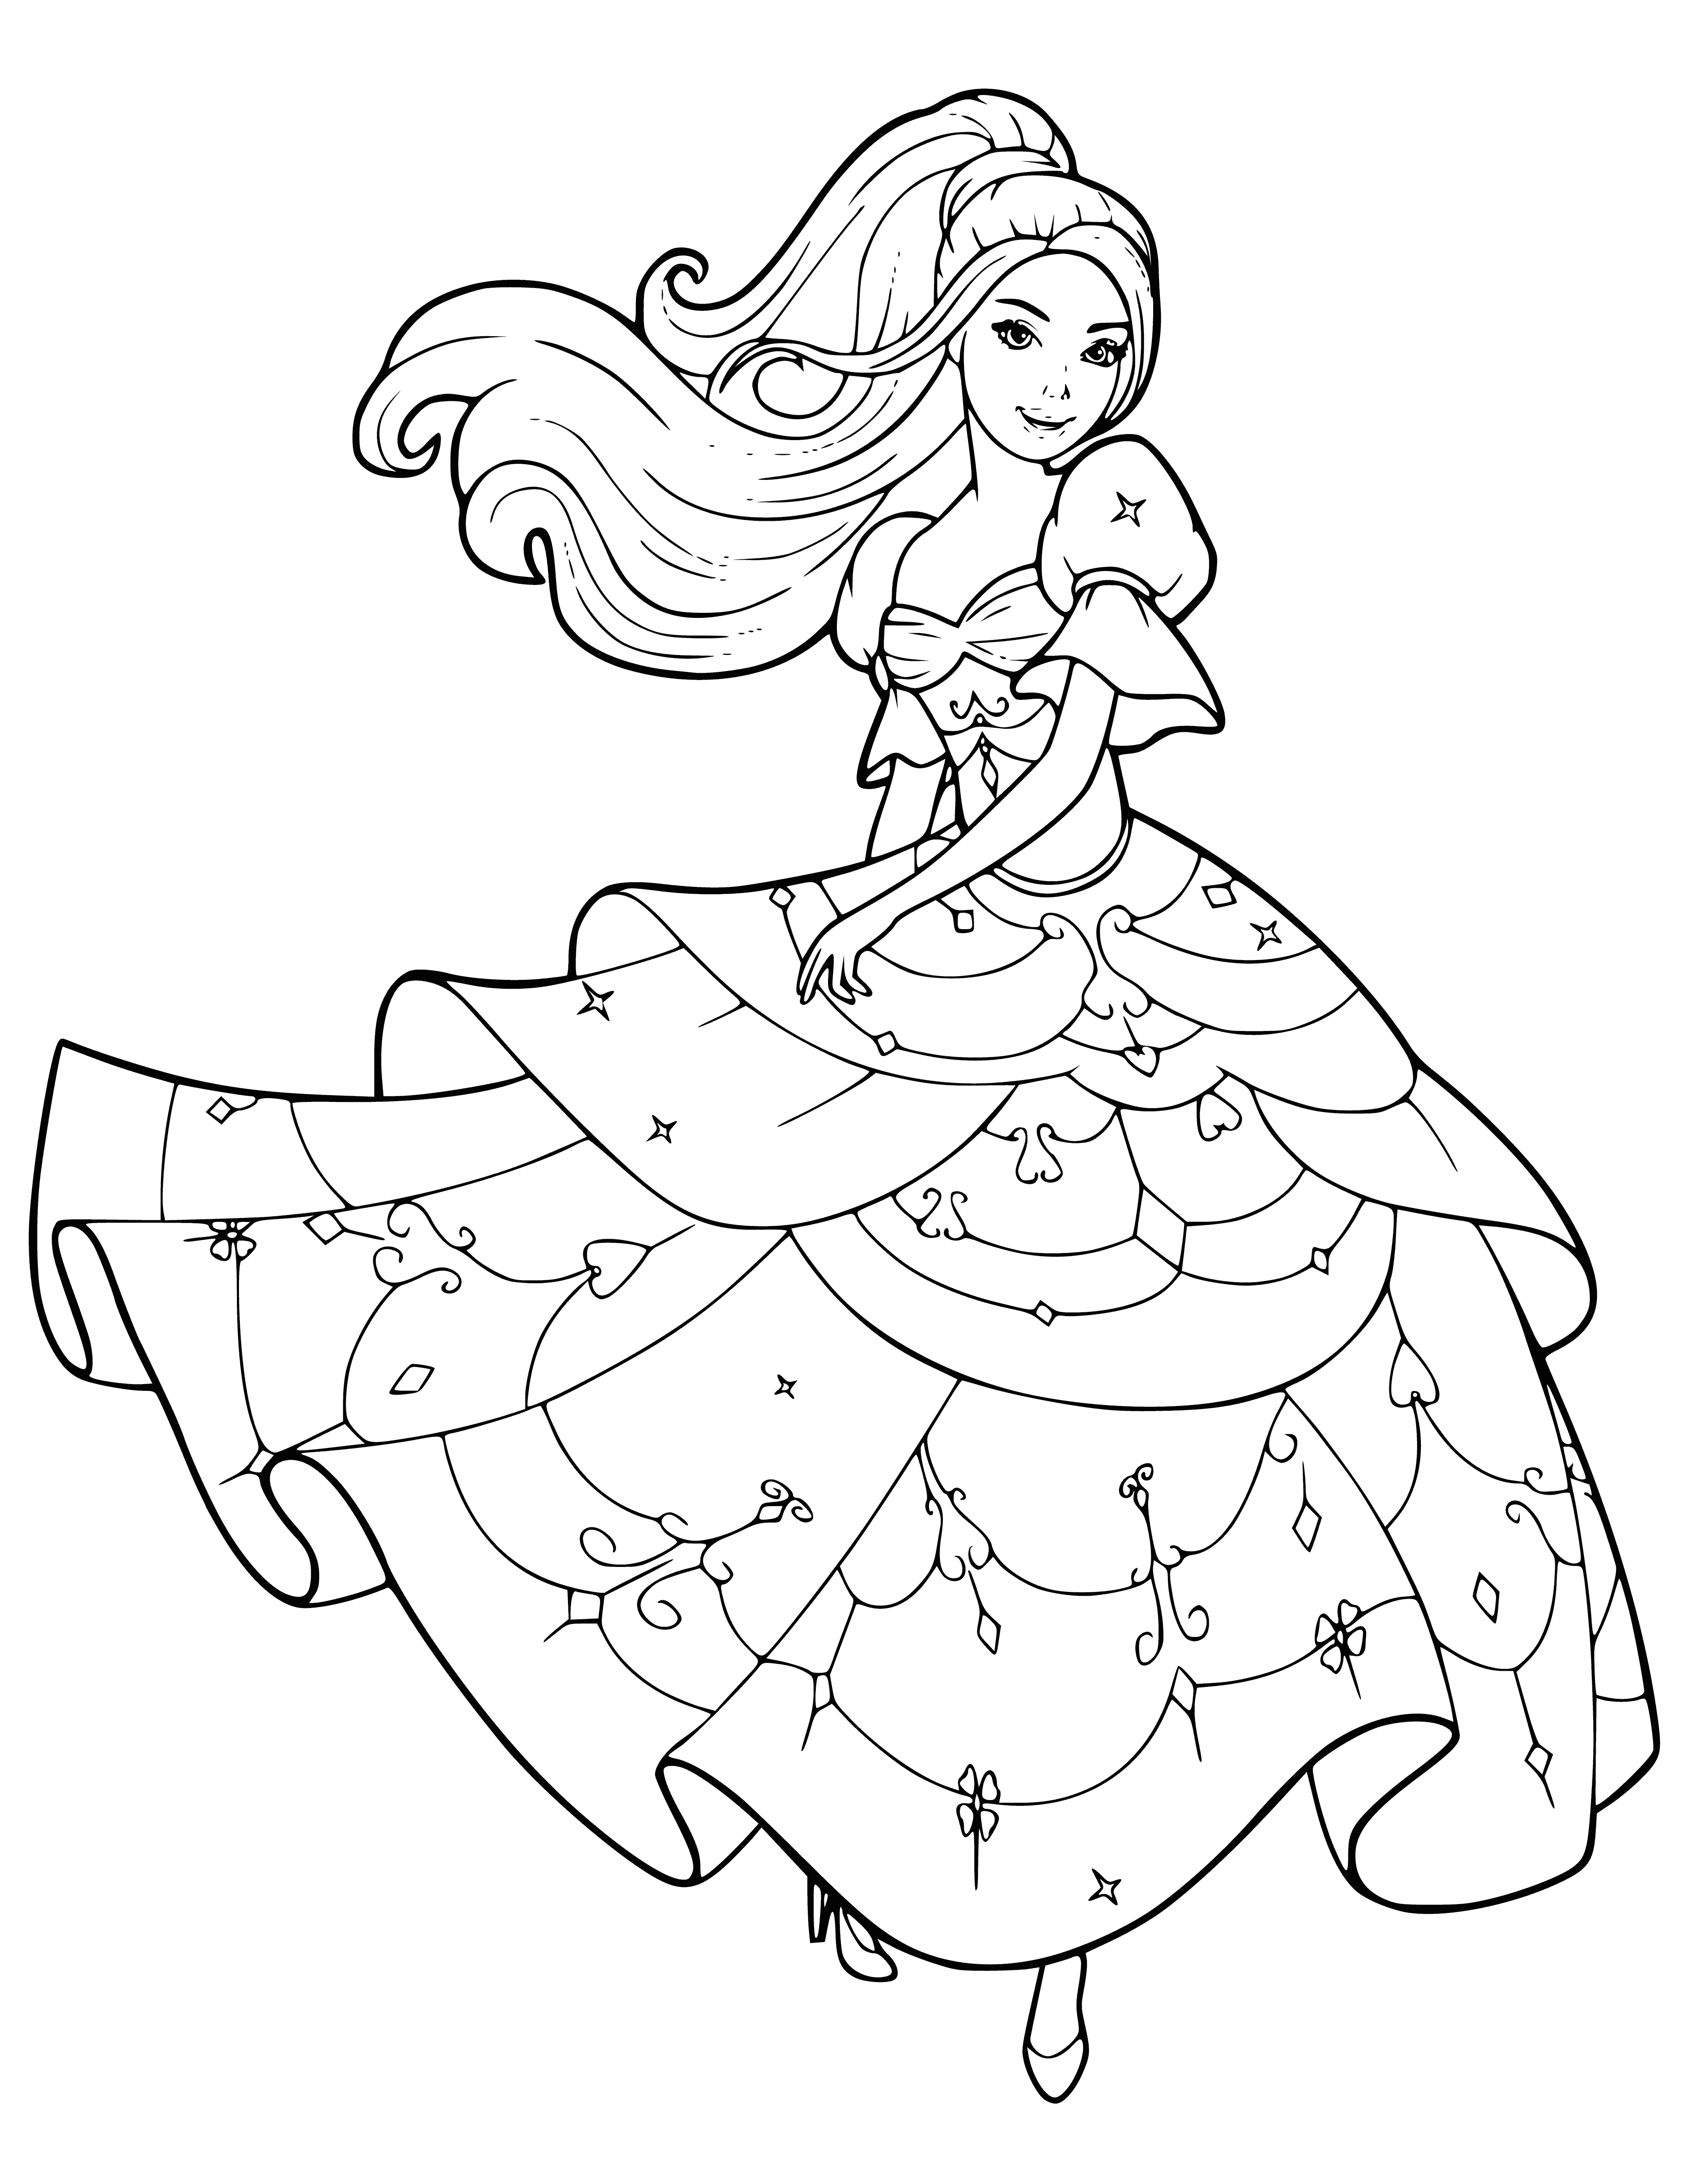 Dance barbie coloring page